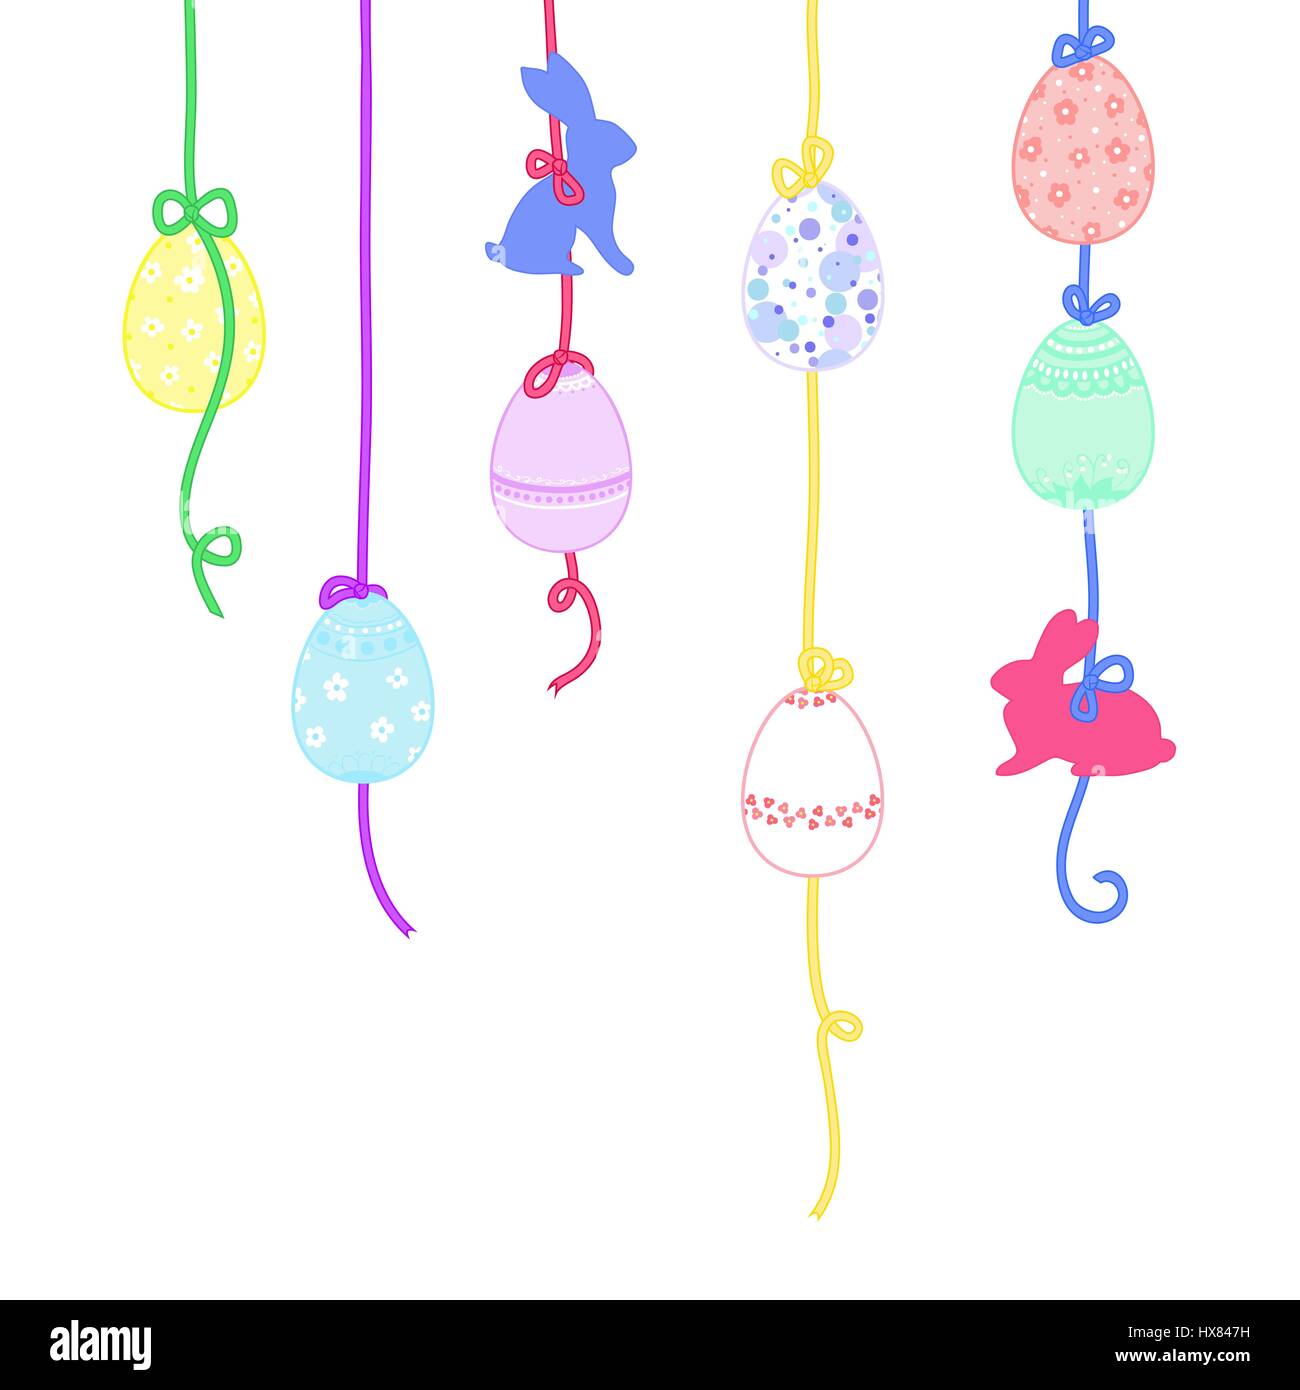 Happy Easter greeting card or background. Easter bunny and Easter eggs with ornaments hung on ribbons with bows. Vector illustration Stock Vector